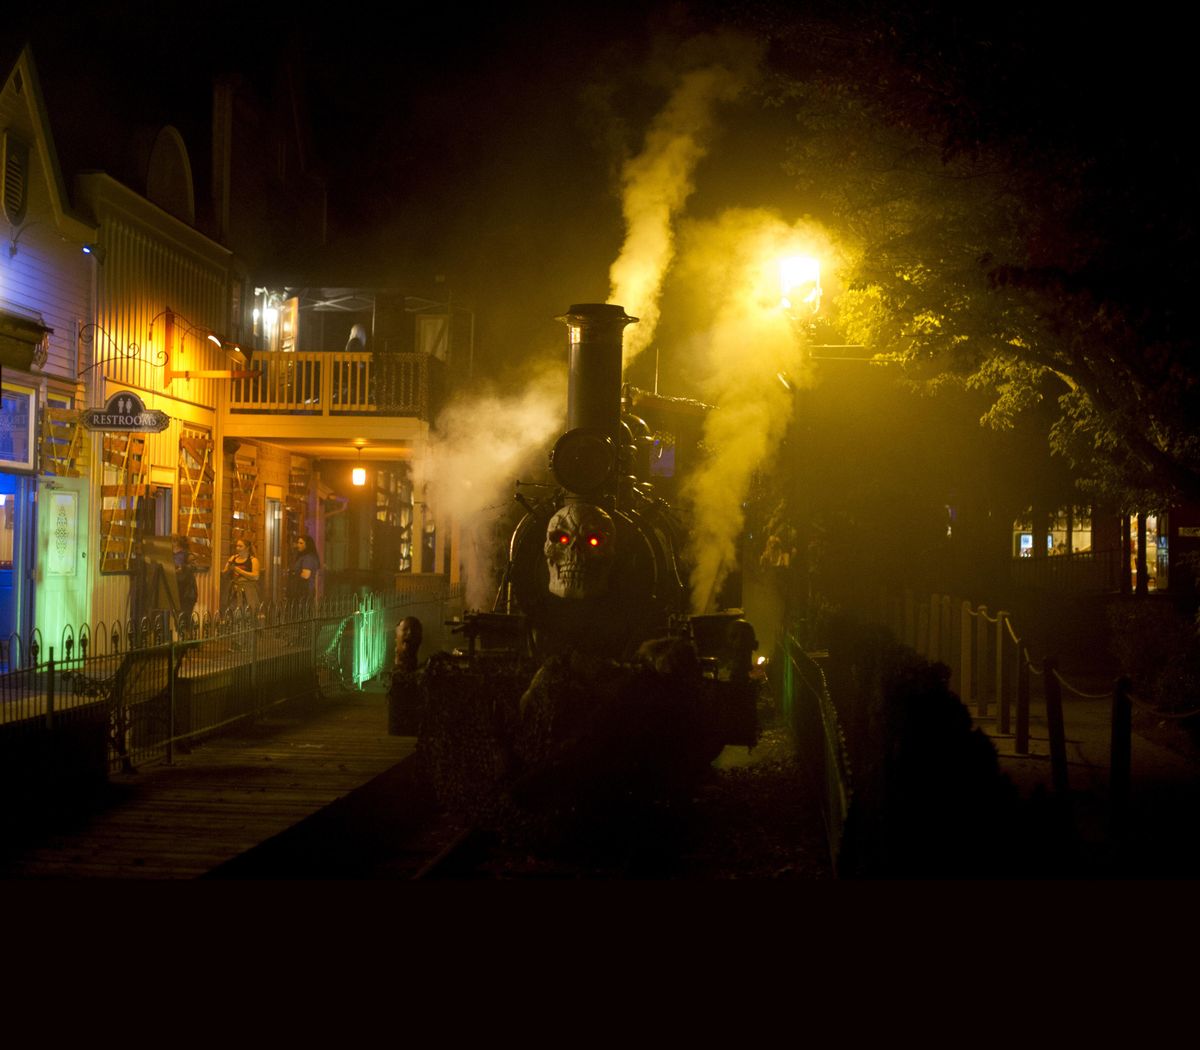 The “Zombiewood Express” prepares to depart the station at Silverwood’s Scarywood Haunted Nights on Friday, Sept. 30, 2016, at Silverwood Theme Park in Athol, Idaho. The annual Halloween event opened Friday and runs until the 29th of October. (Tyler Tjomsland / The Spokesman-Review)